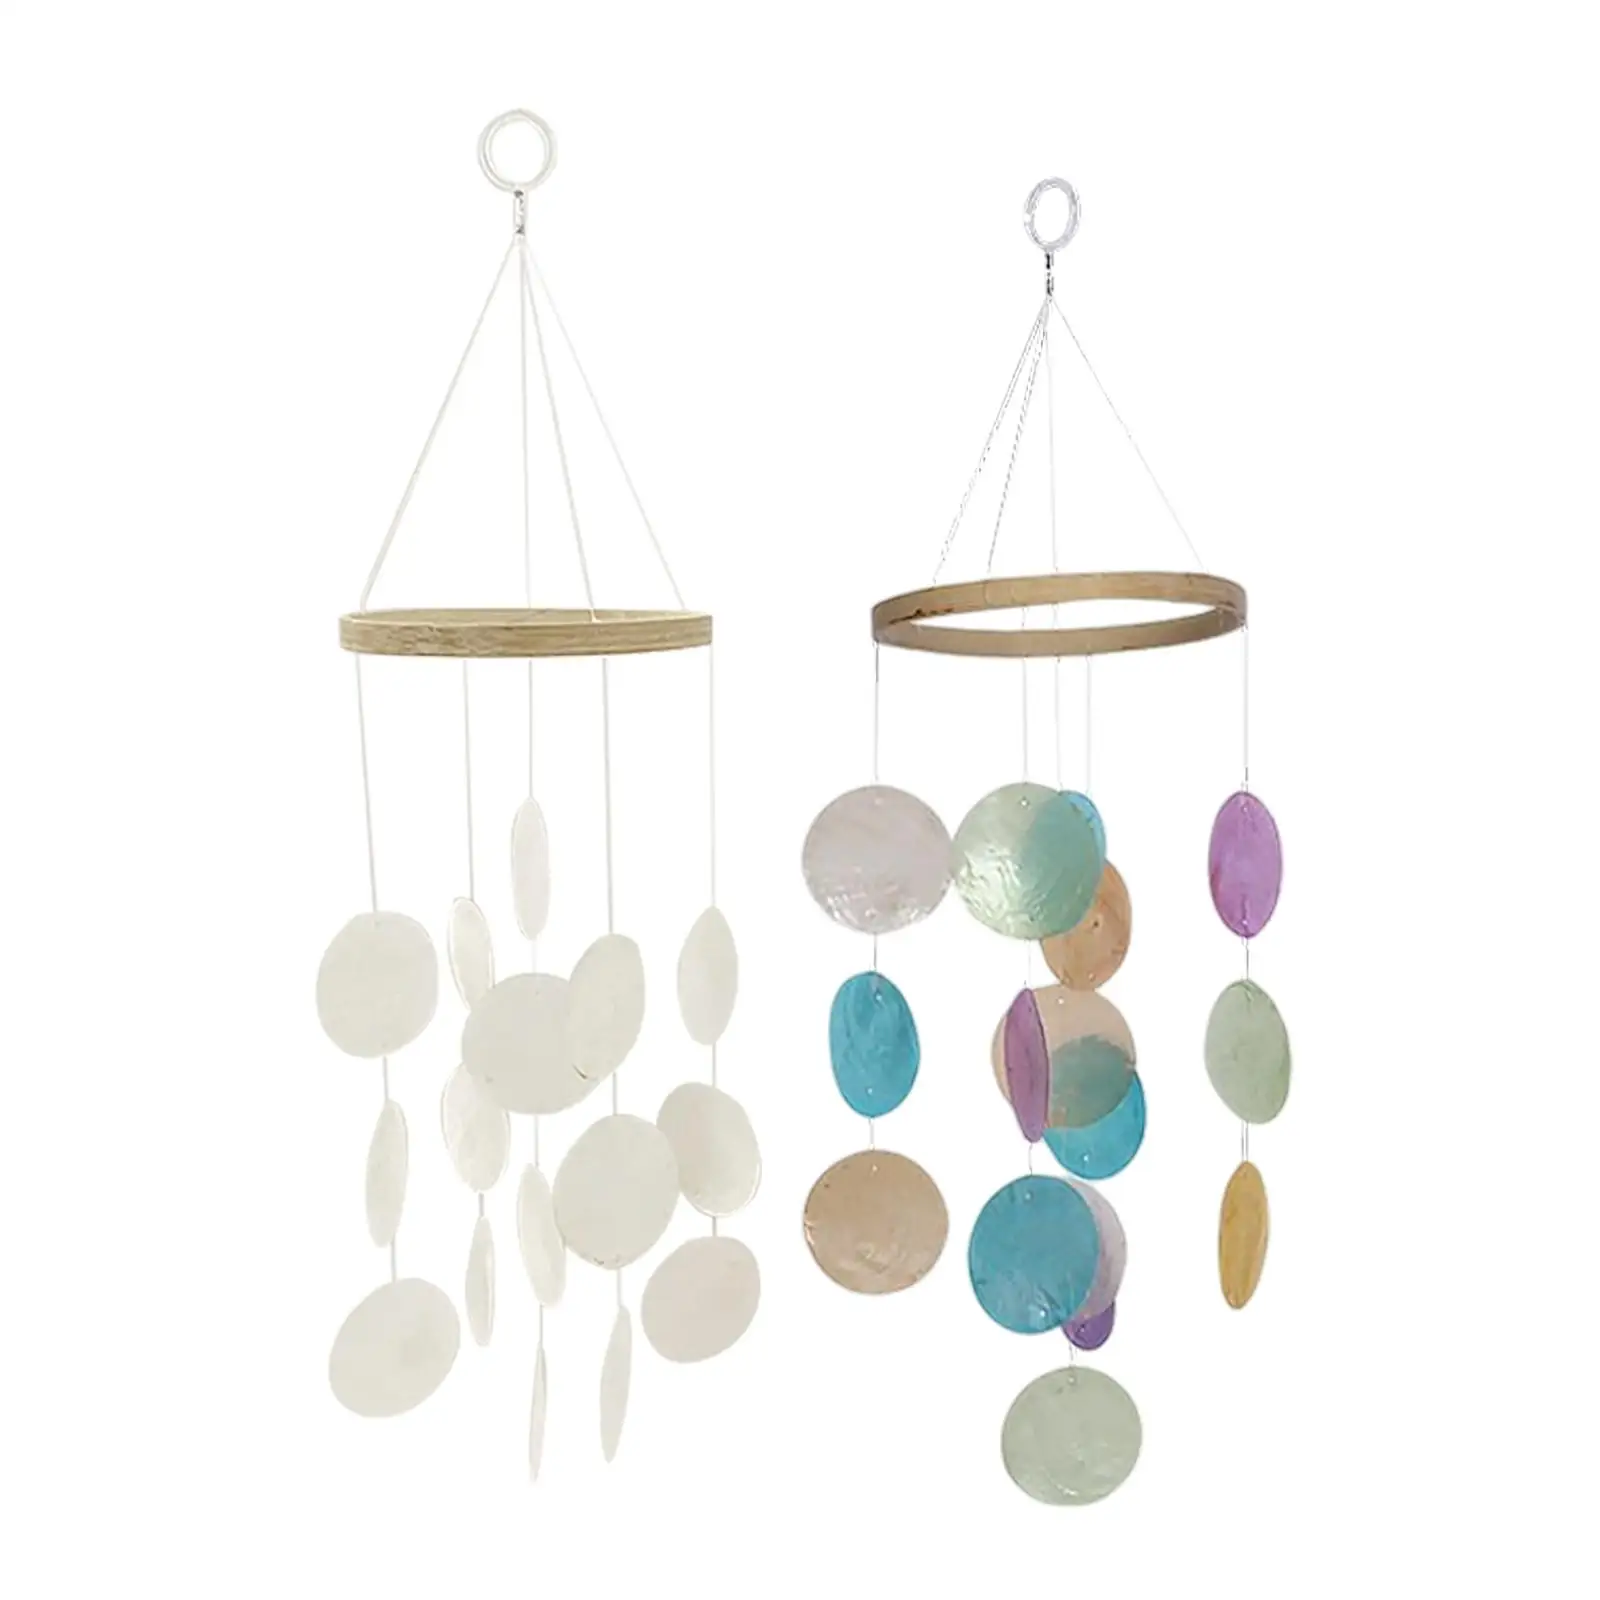 Bohemian Shell Wind Chimes Memorial Sympathy Hanging Chime Windchimes for Garden Indoor Balcony Home Decor